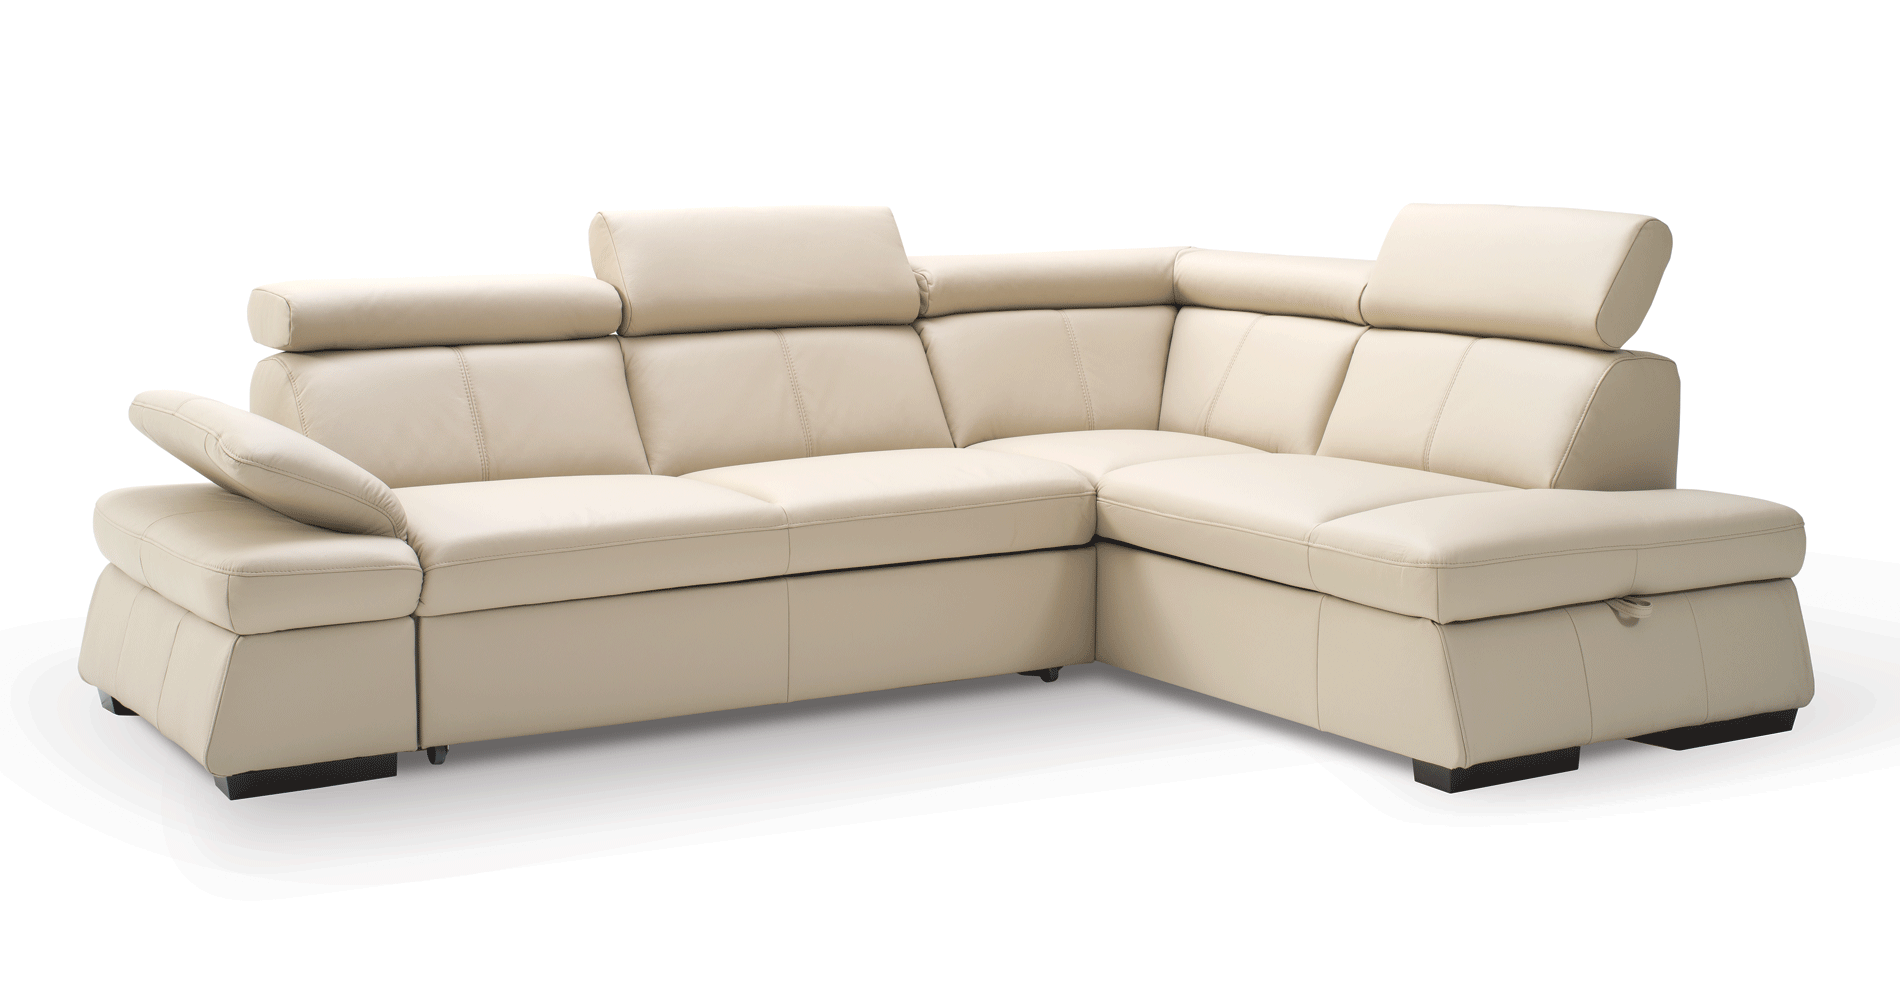 Living Room Furniture Sofas Loveseats and Chairs Malpensa Sectional w/ Bed & storage